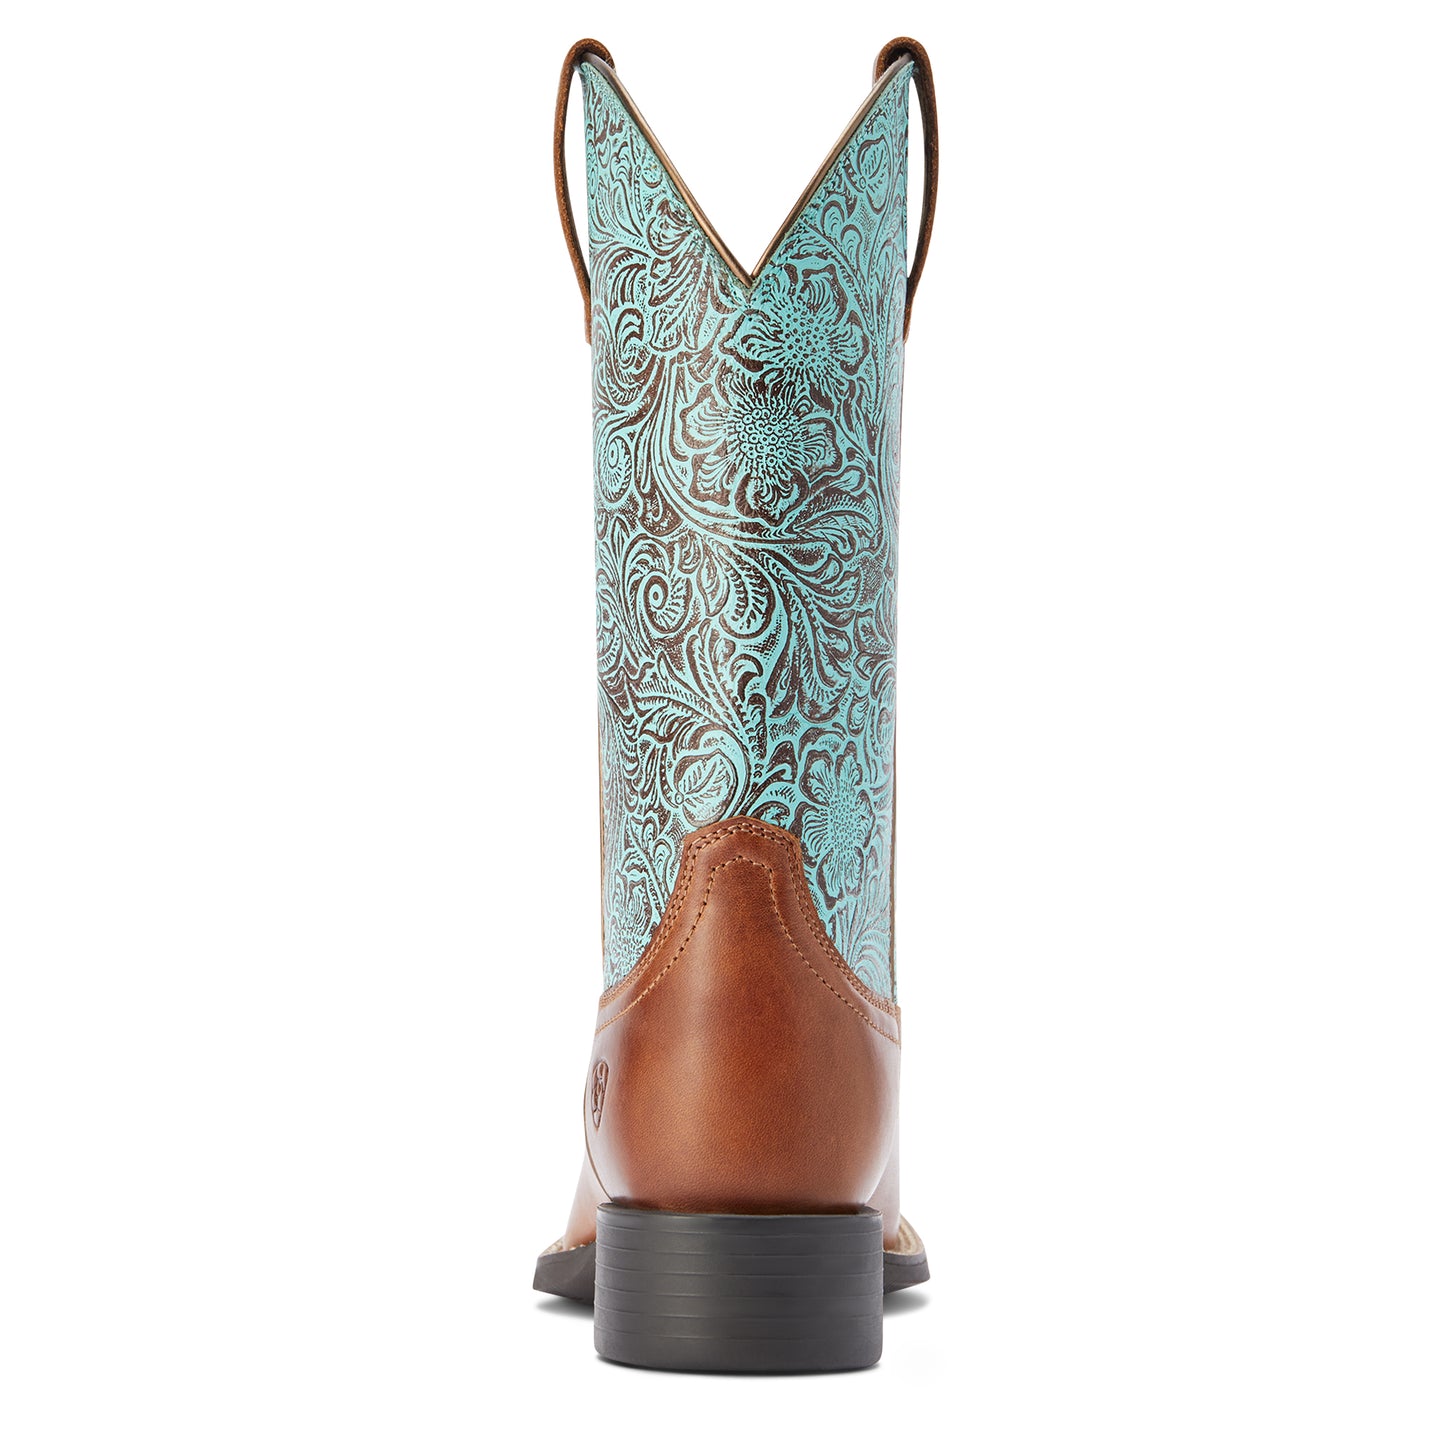 Ariat® Ladies Round Up Square Toe Brown & Turquoise Boots 10042534